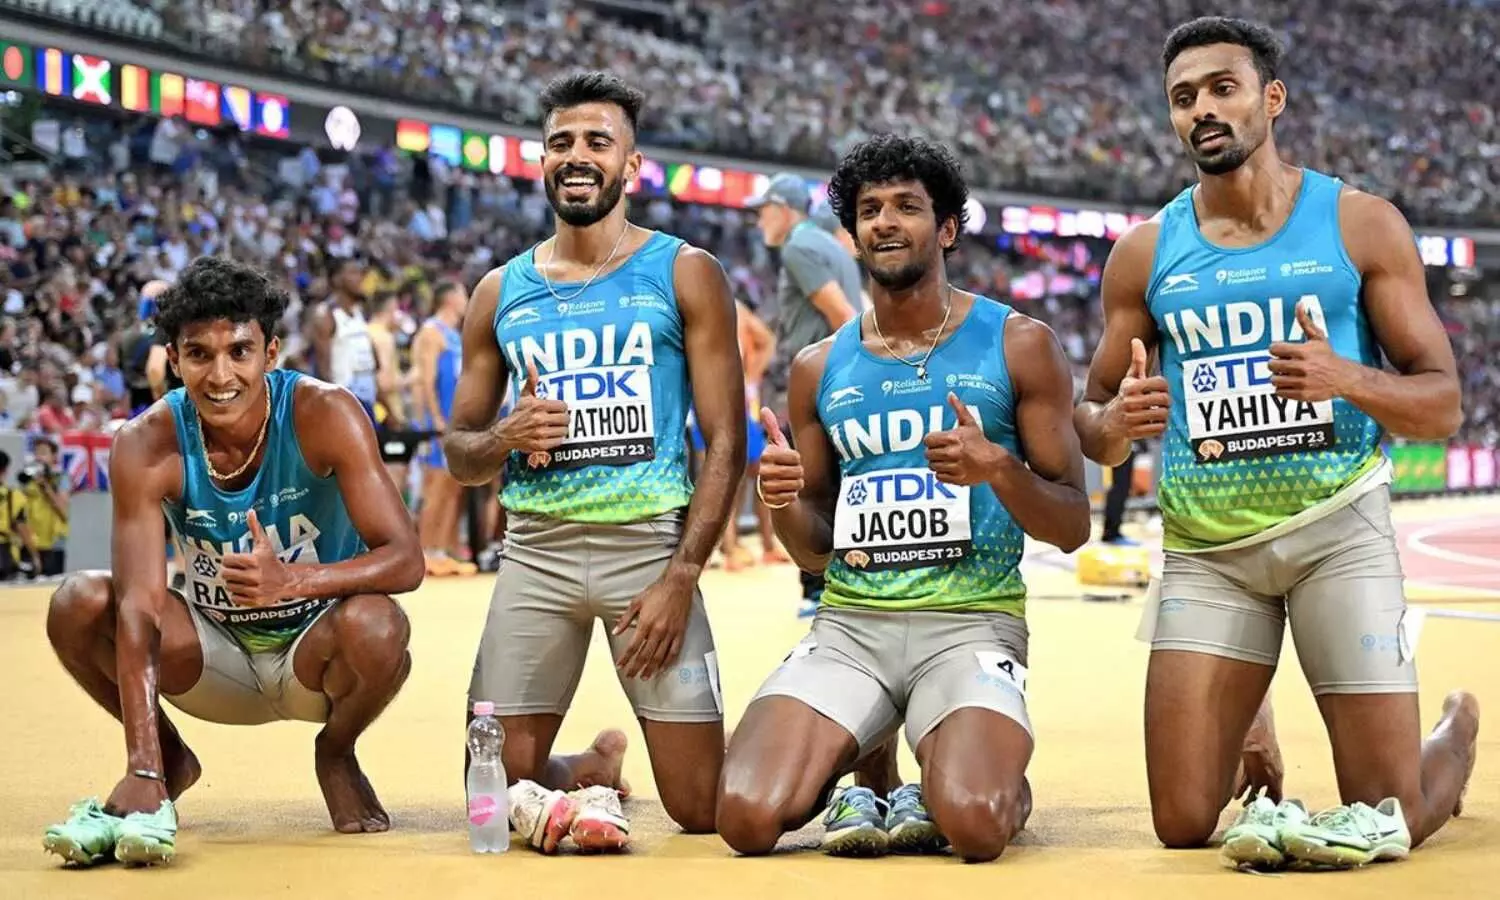 India’s 30-member athletics contingent jets off to three training bases ahead of 2024 Paris Olympics